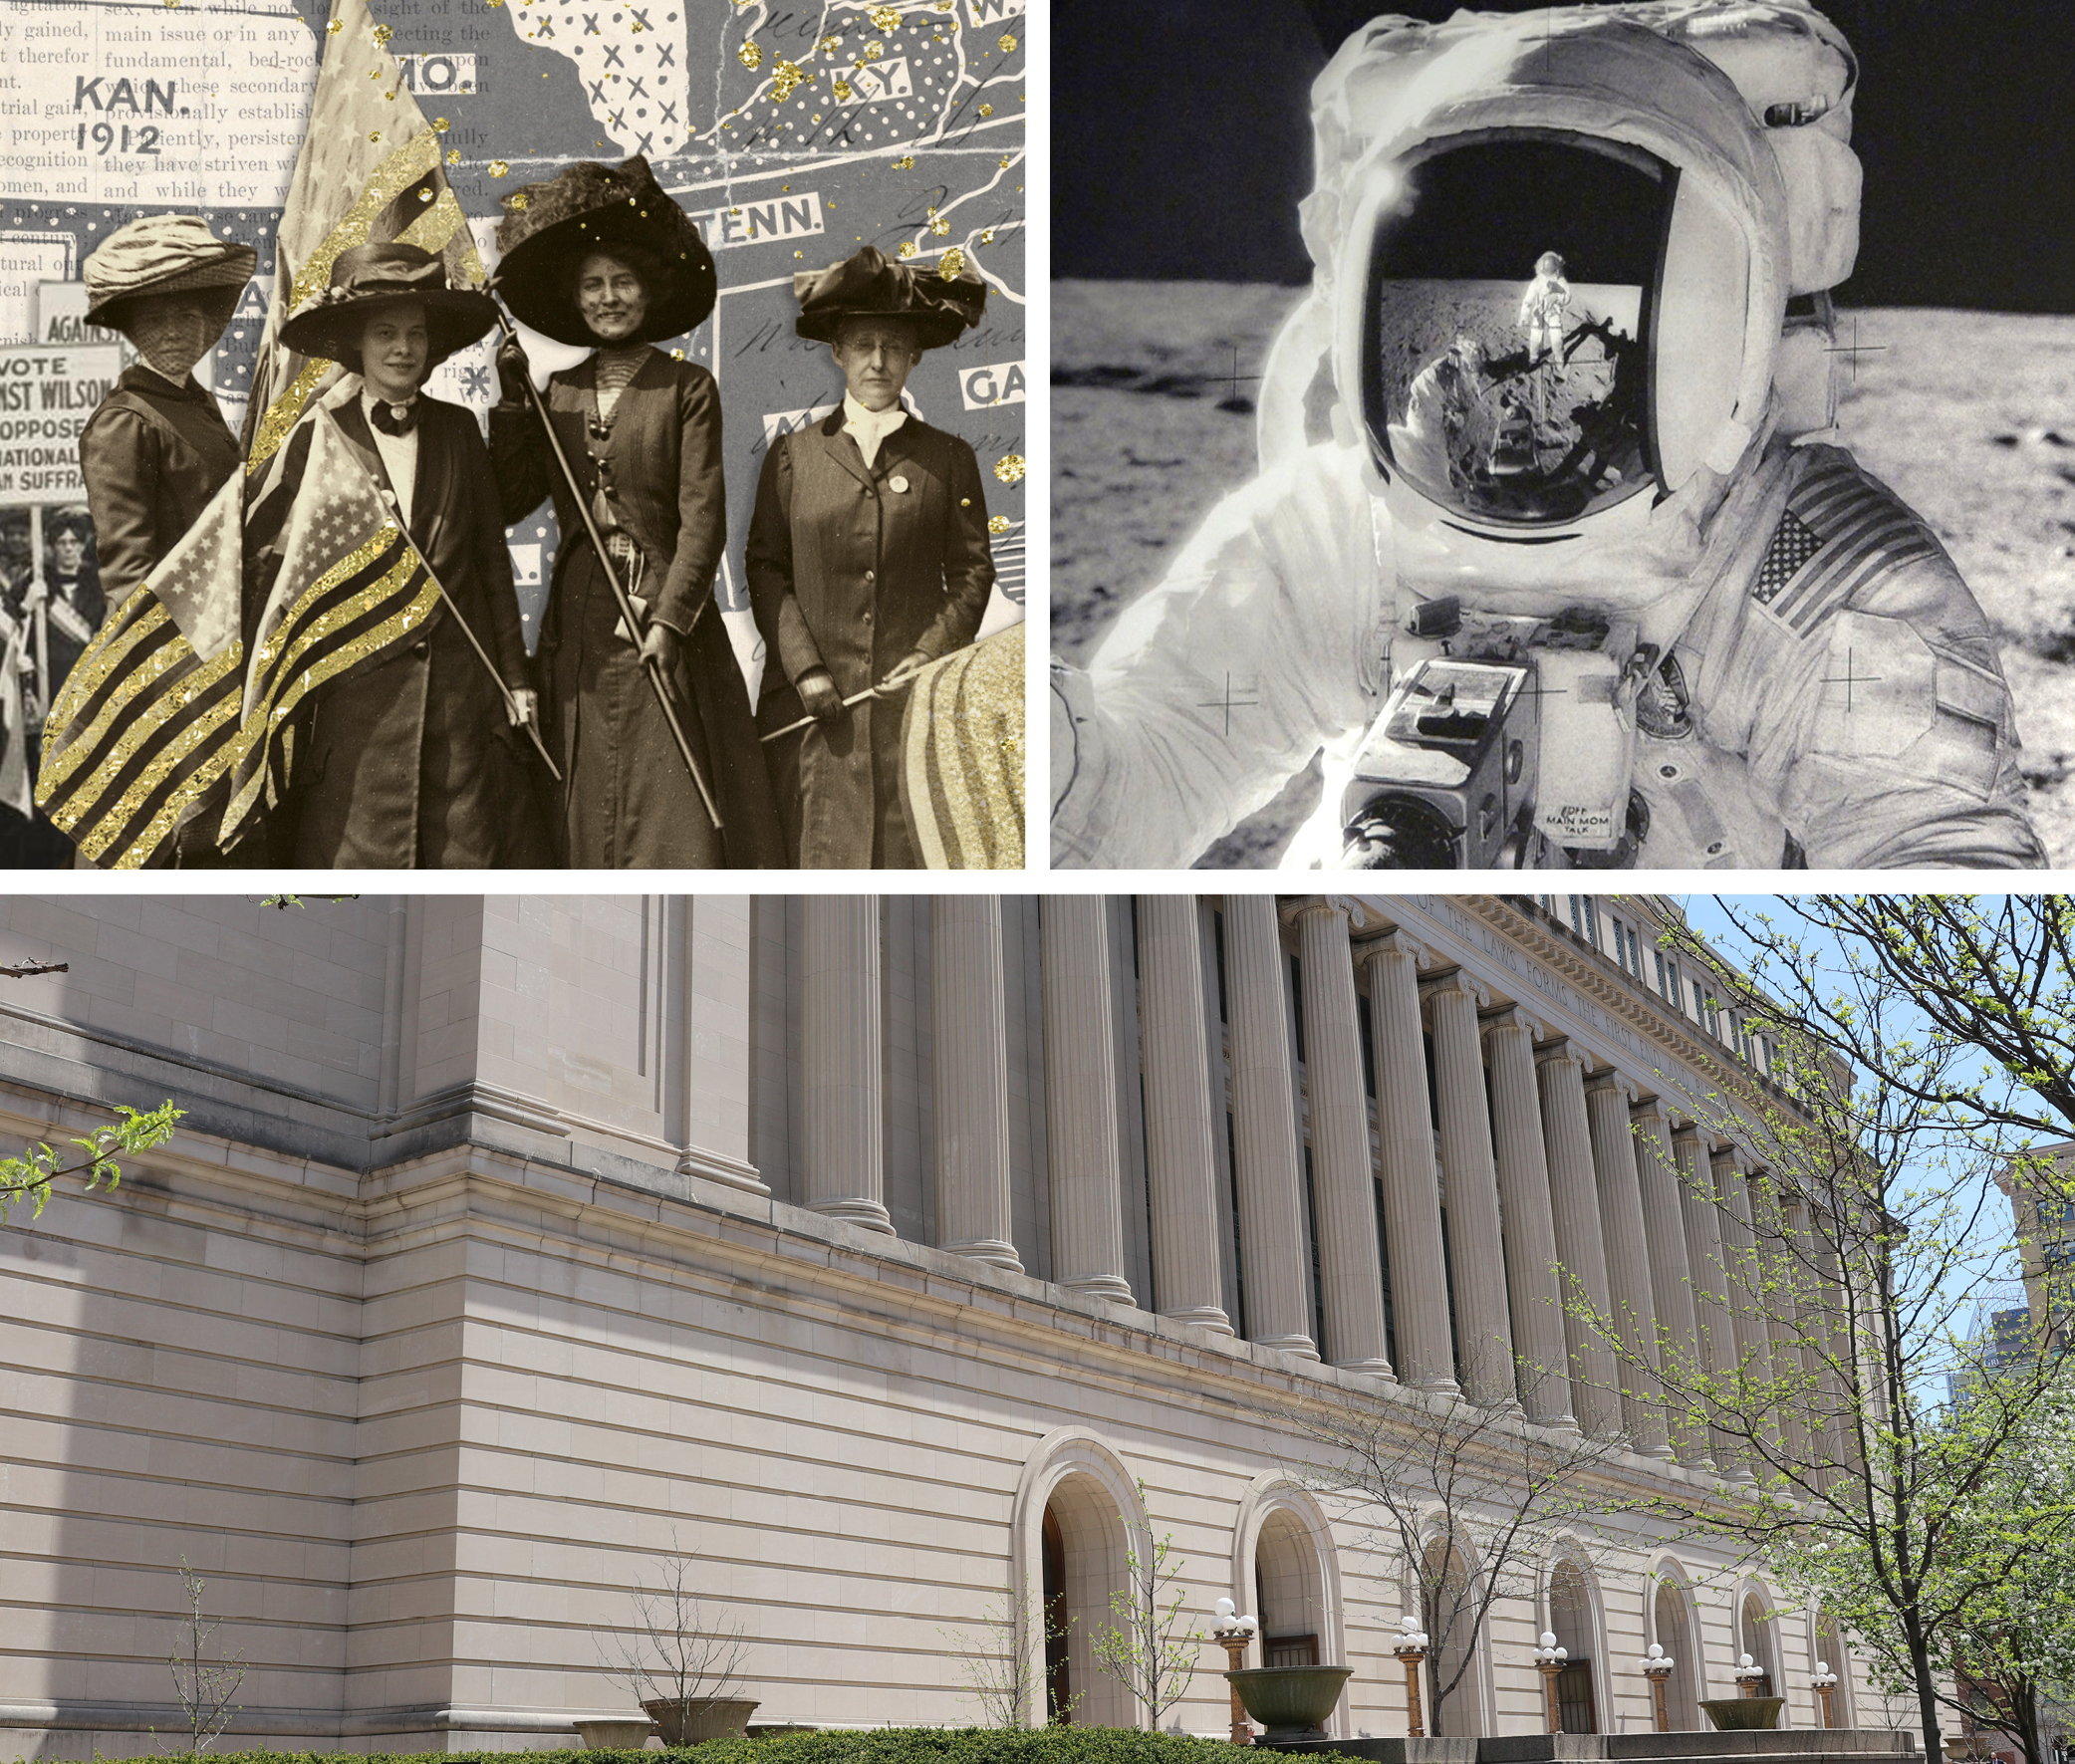 Images including (top left) historic image of women protesting for their right to vote; (top right) image of an astronaut on the moon; and (bottom) an image of the Hamilton County, Ohio courthouse